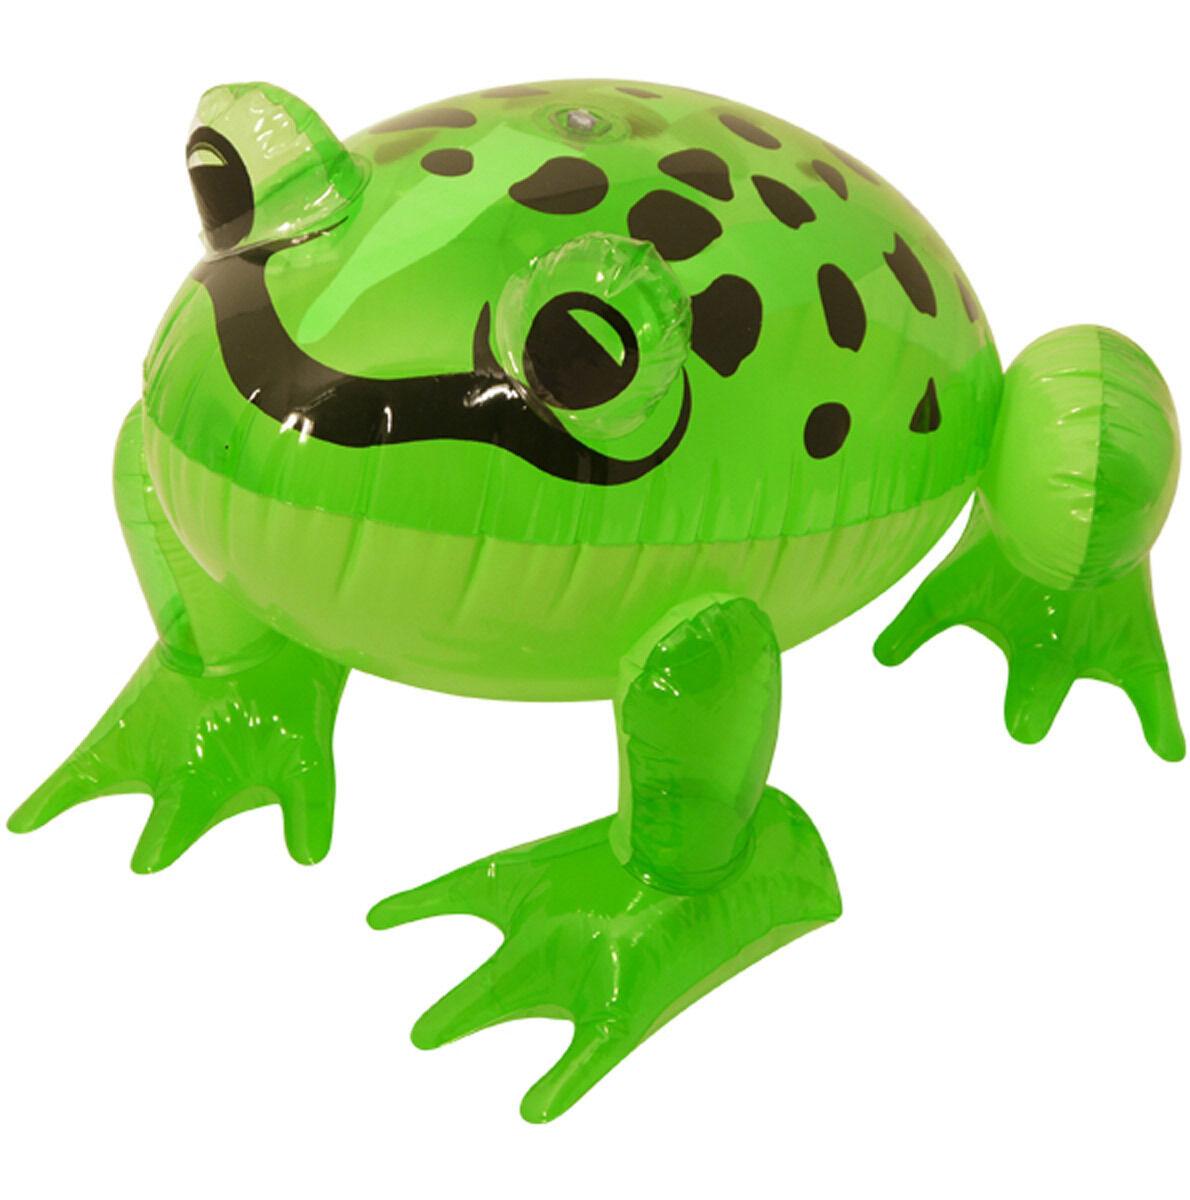 Inflatable Blow Up Frog 39 cm Fancy dress Party Accessory - Labreeze